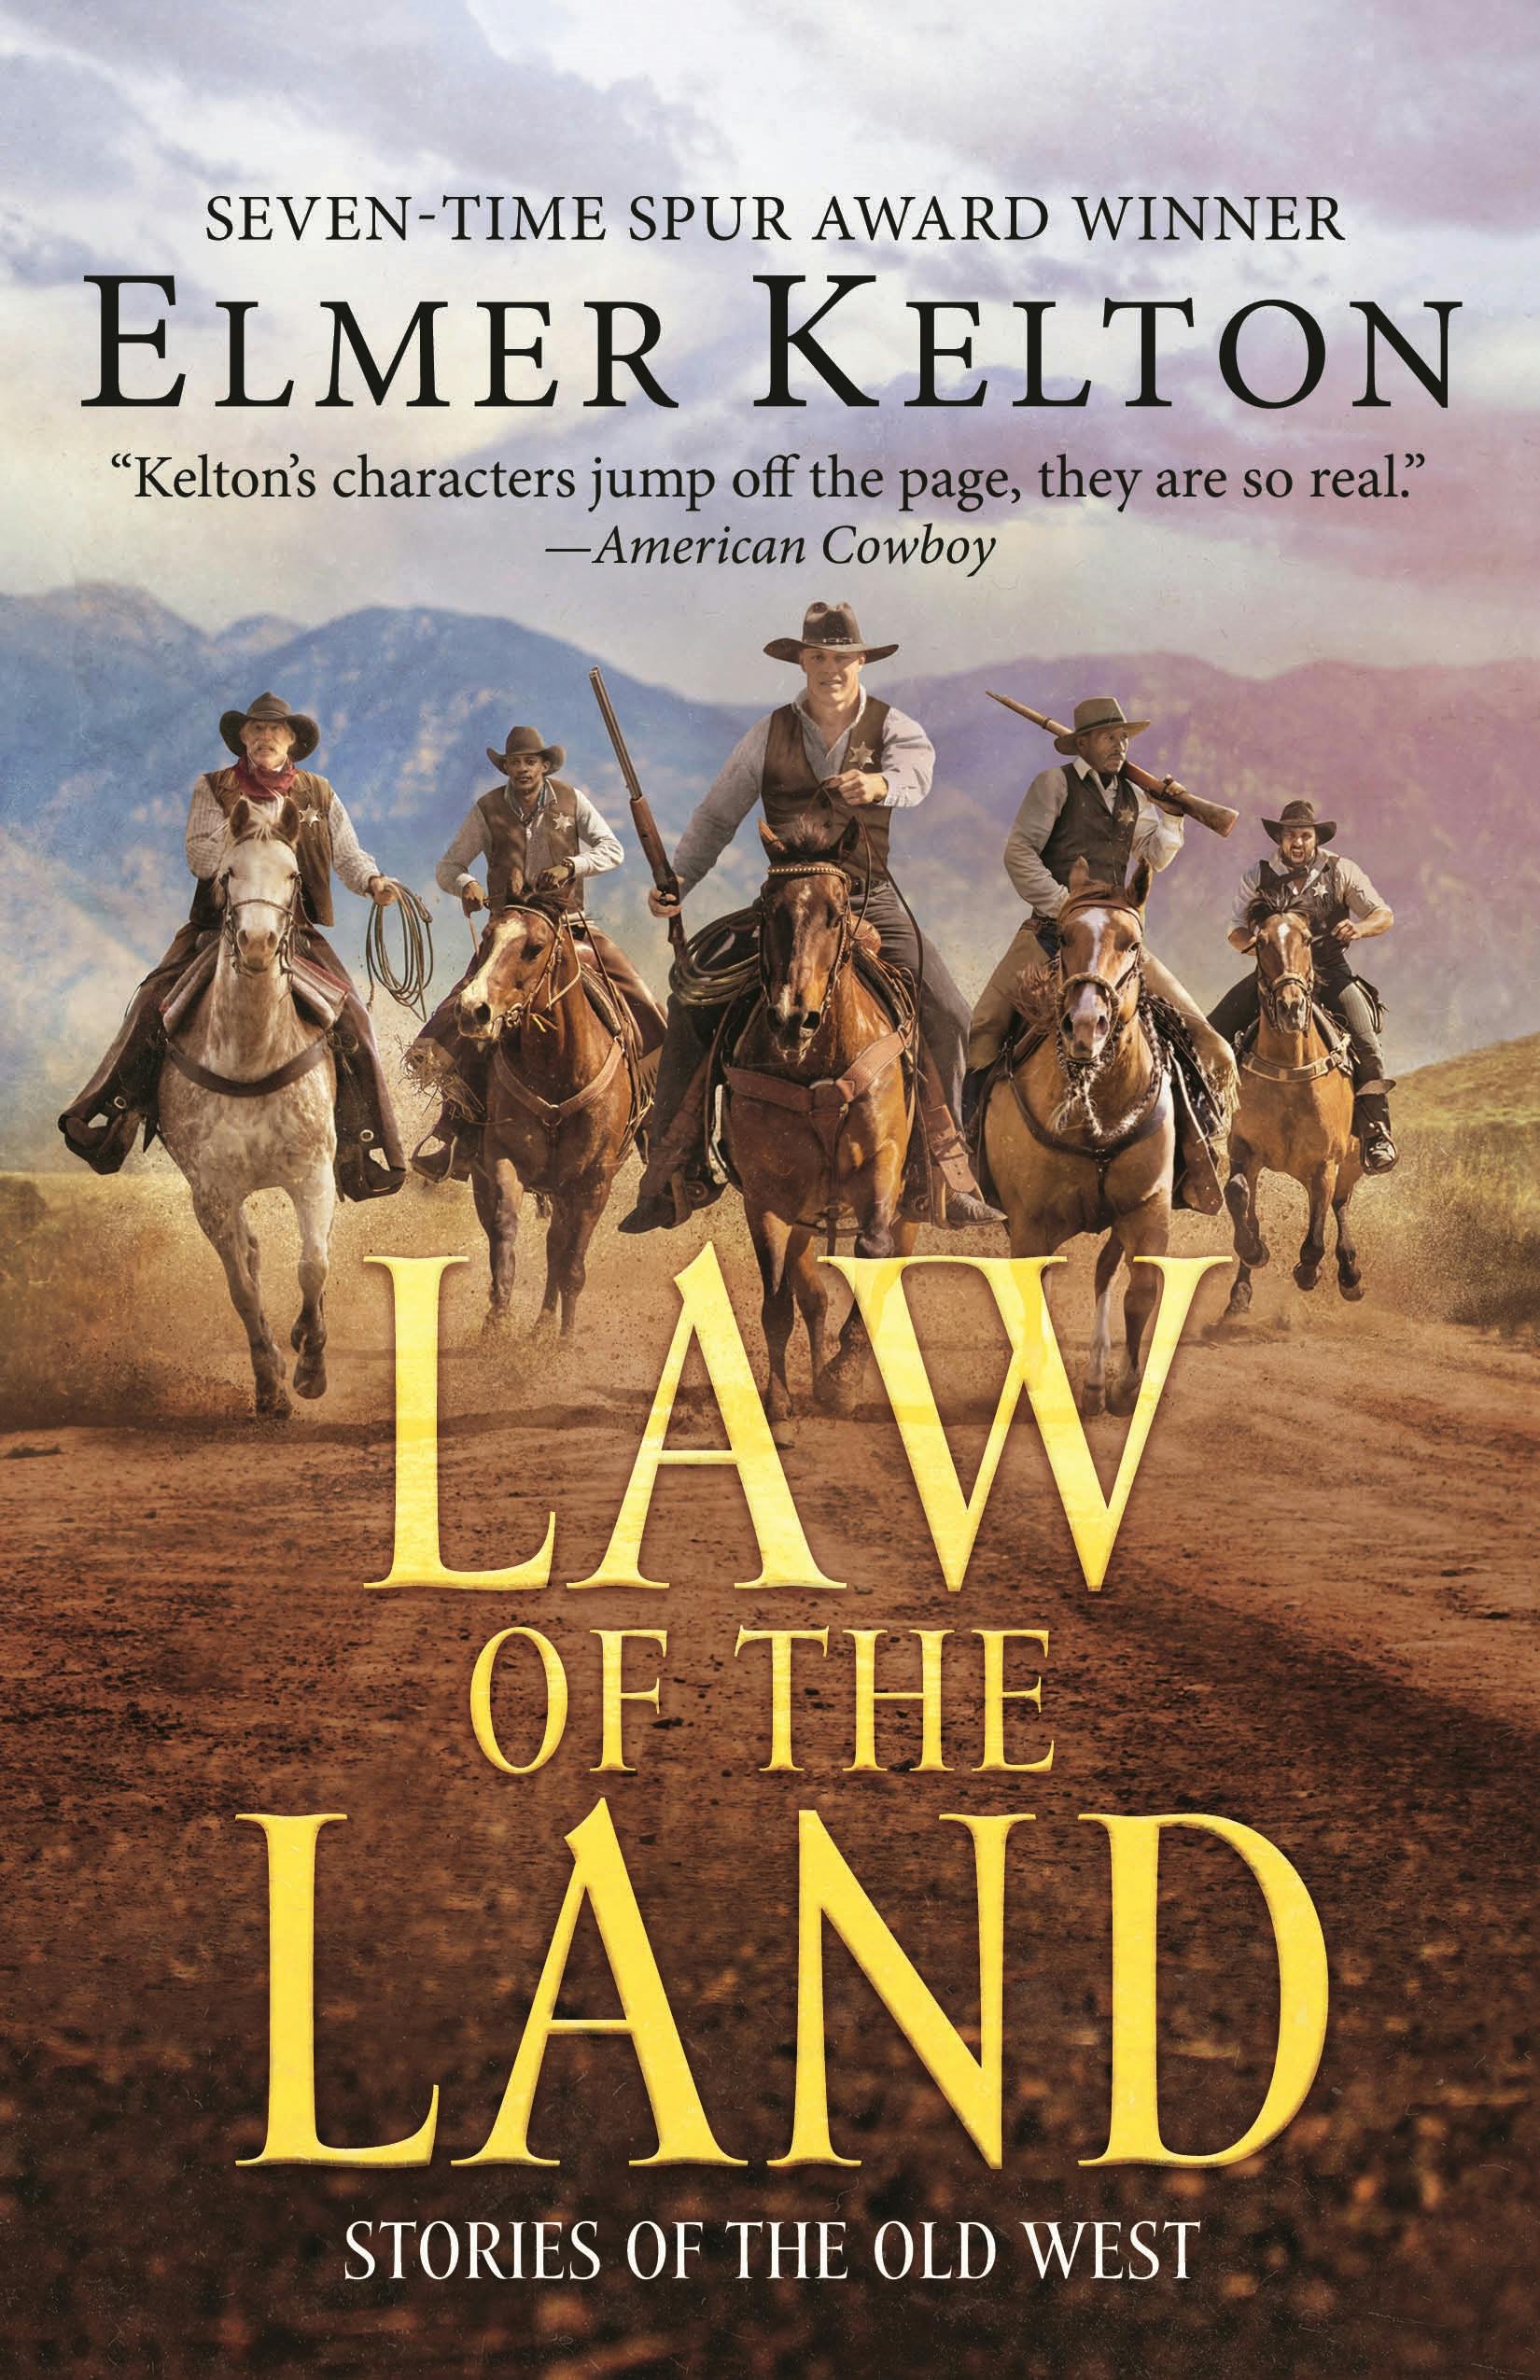 Cover for the book titled as: Law of the Land